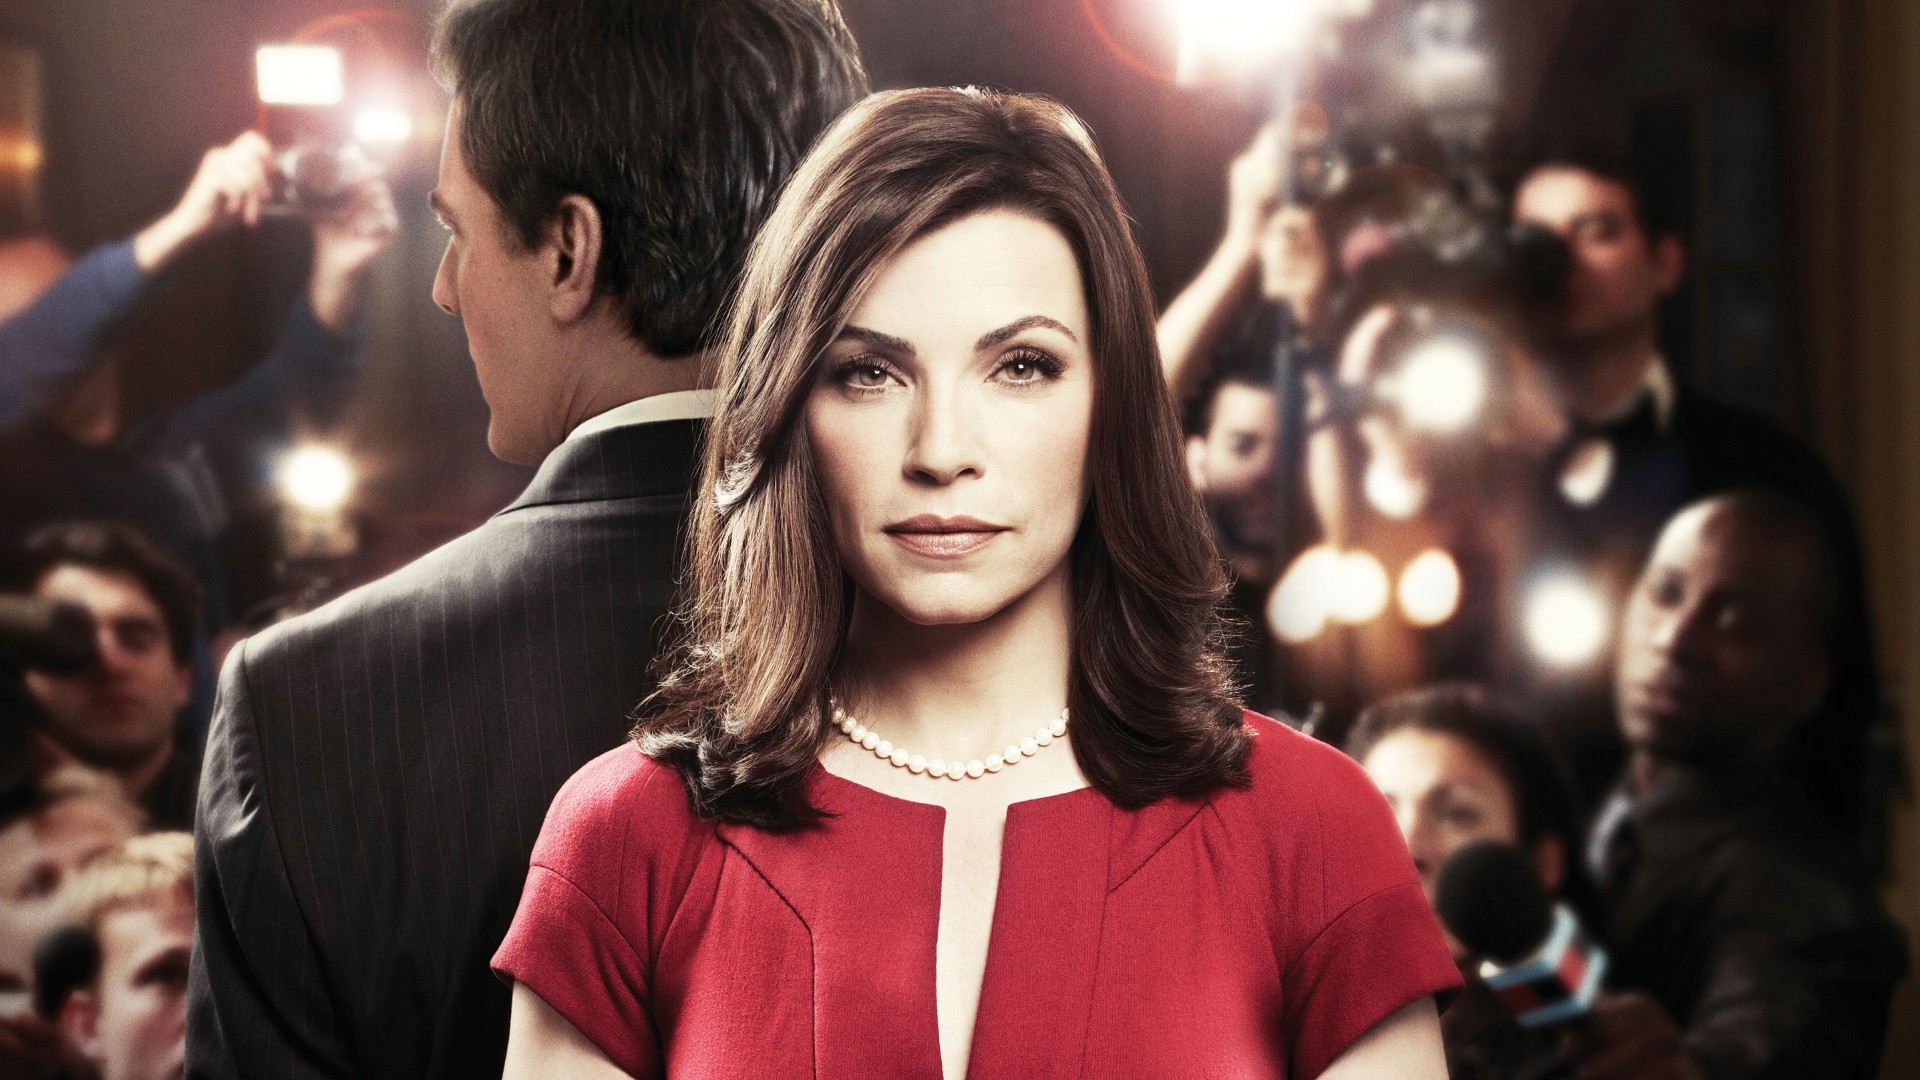 The Good Wife Wallpapers